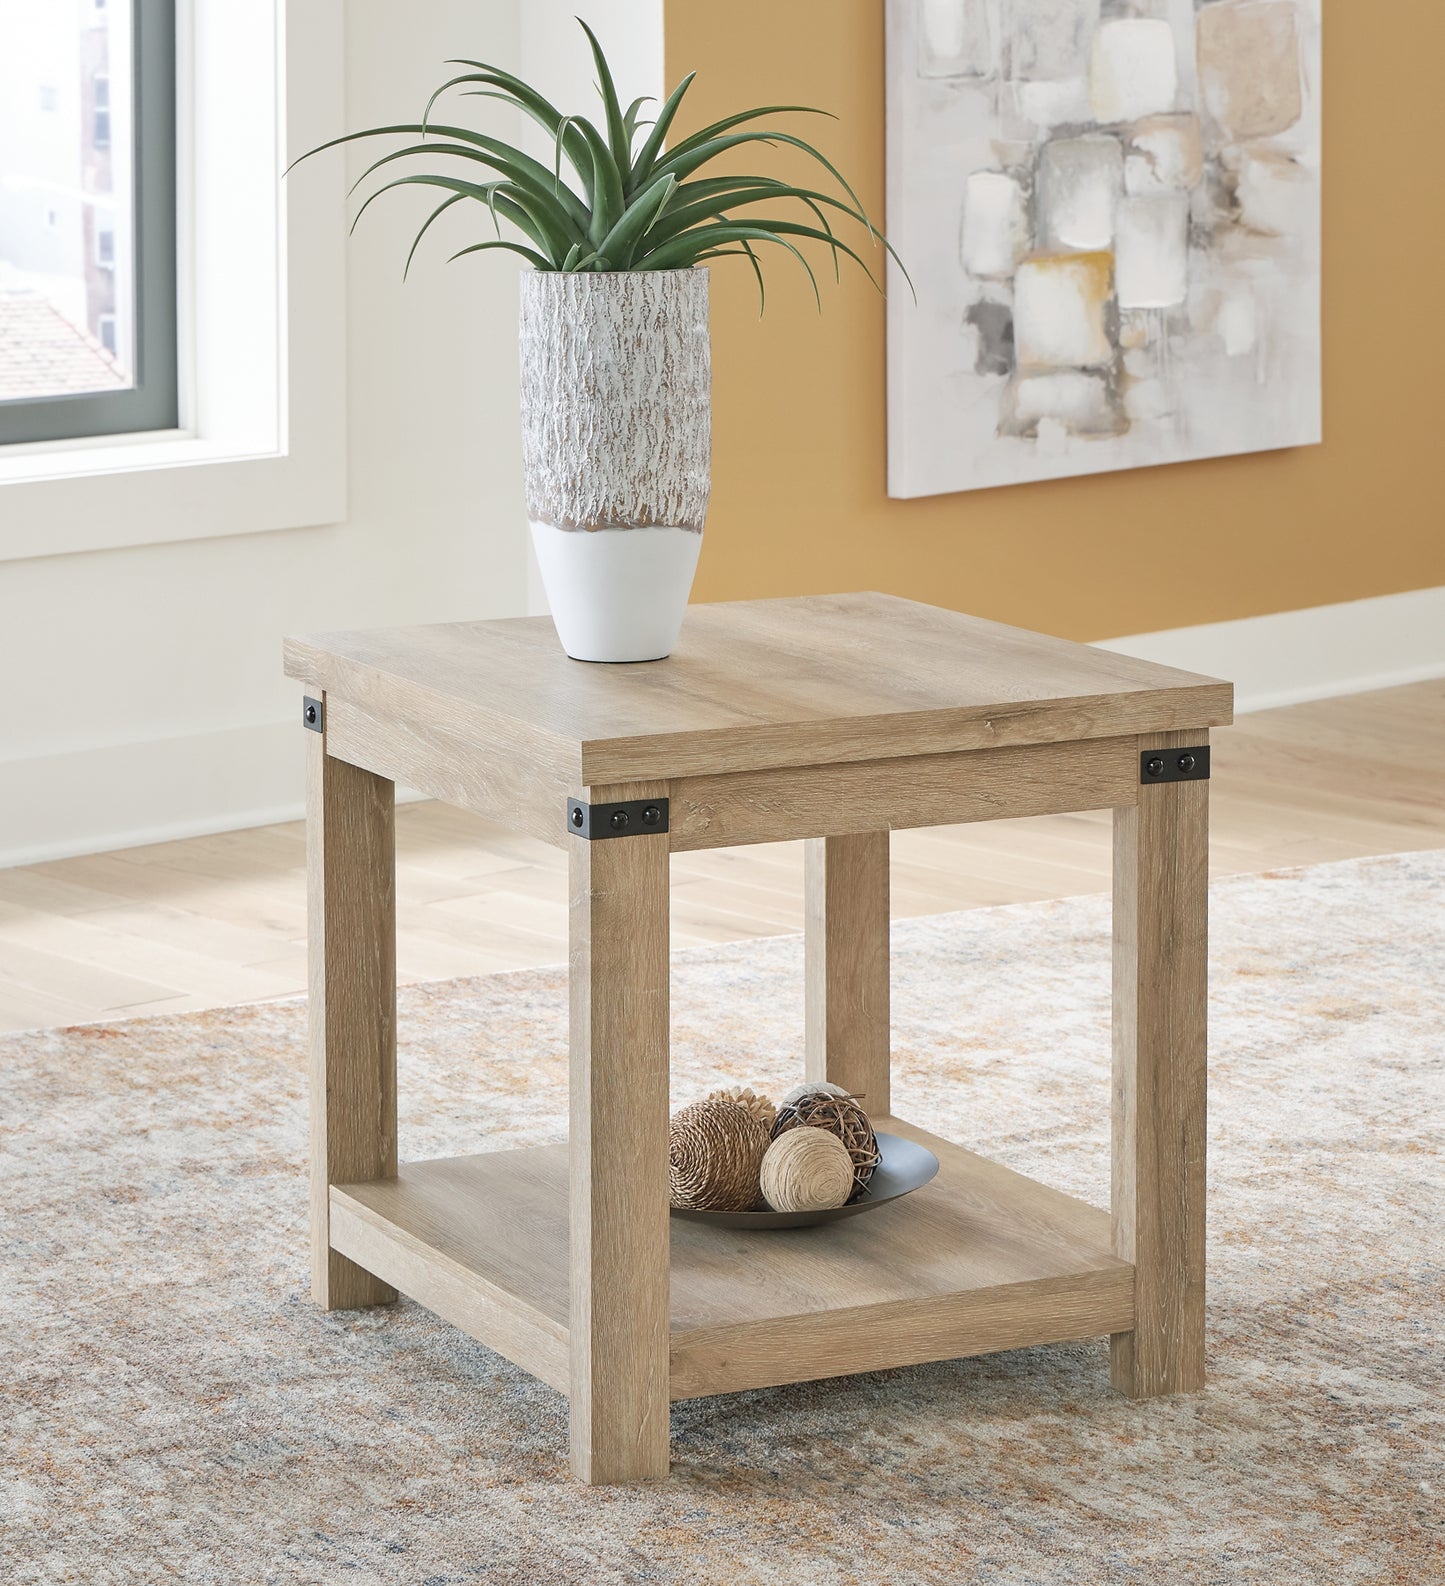 Ashley Express - Calaboro Square End Table